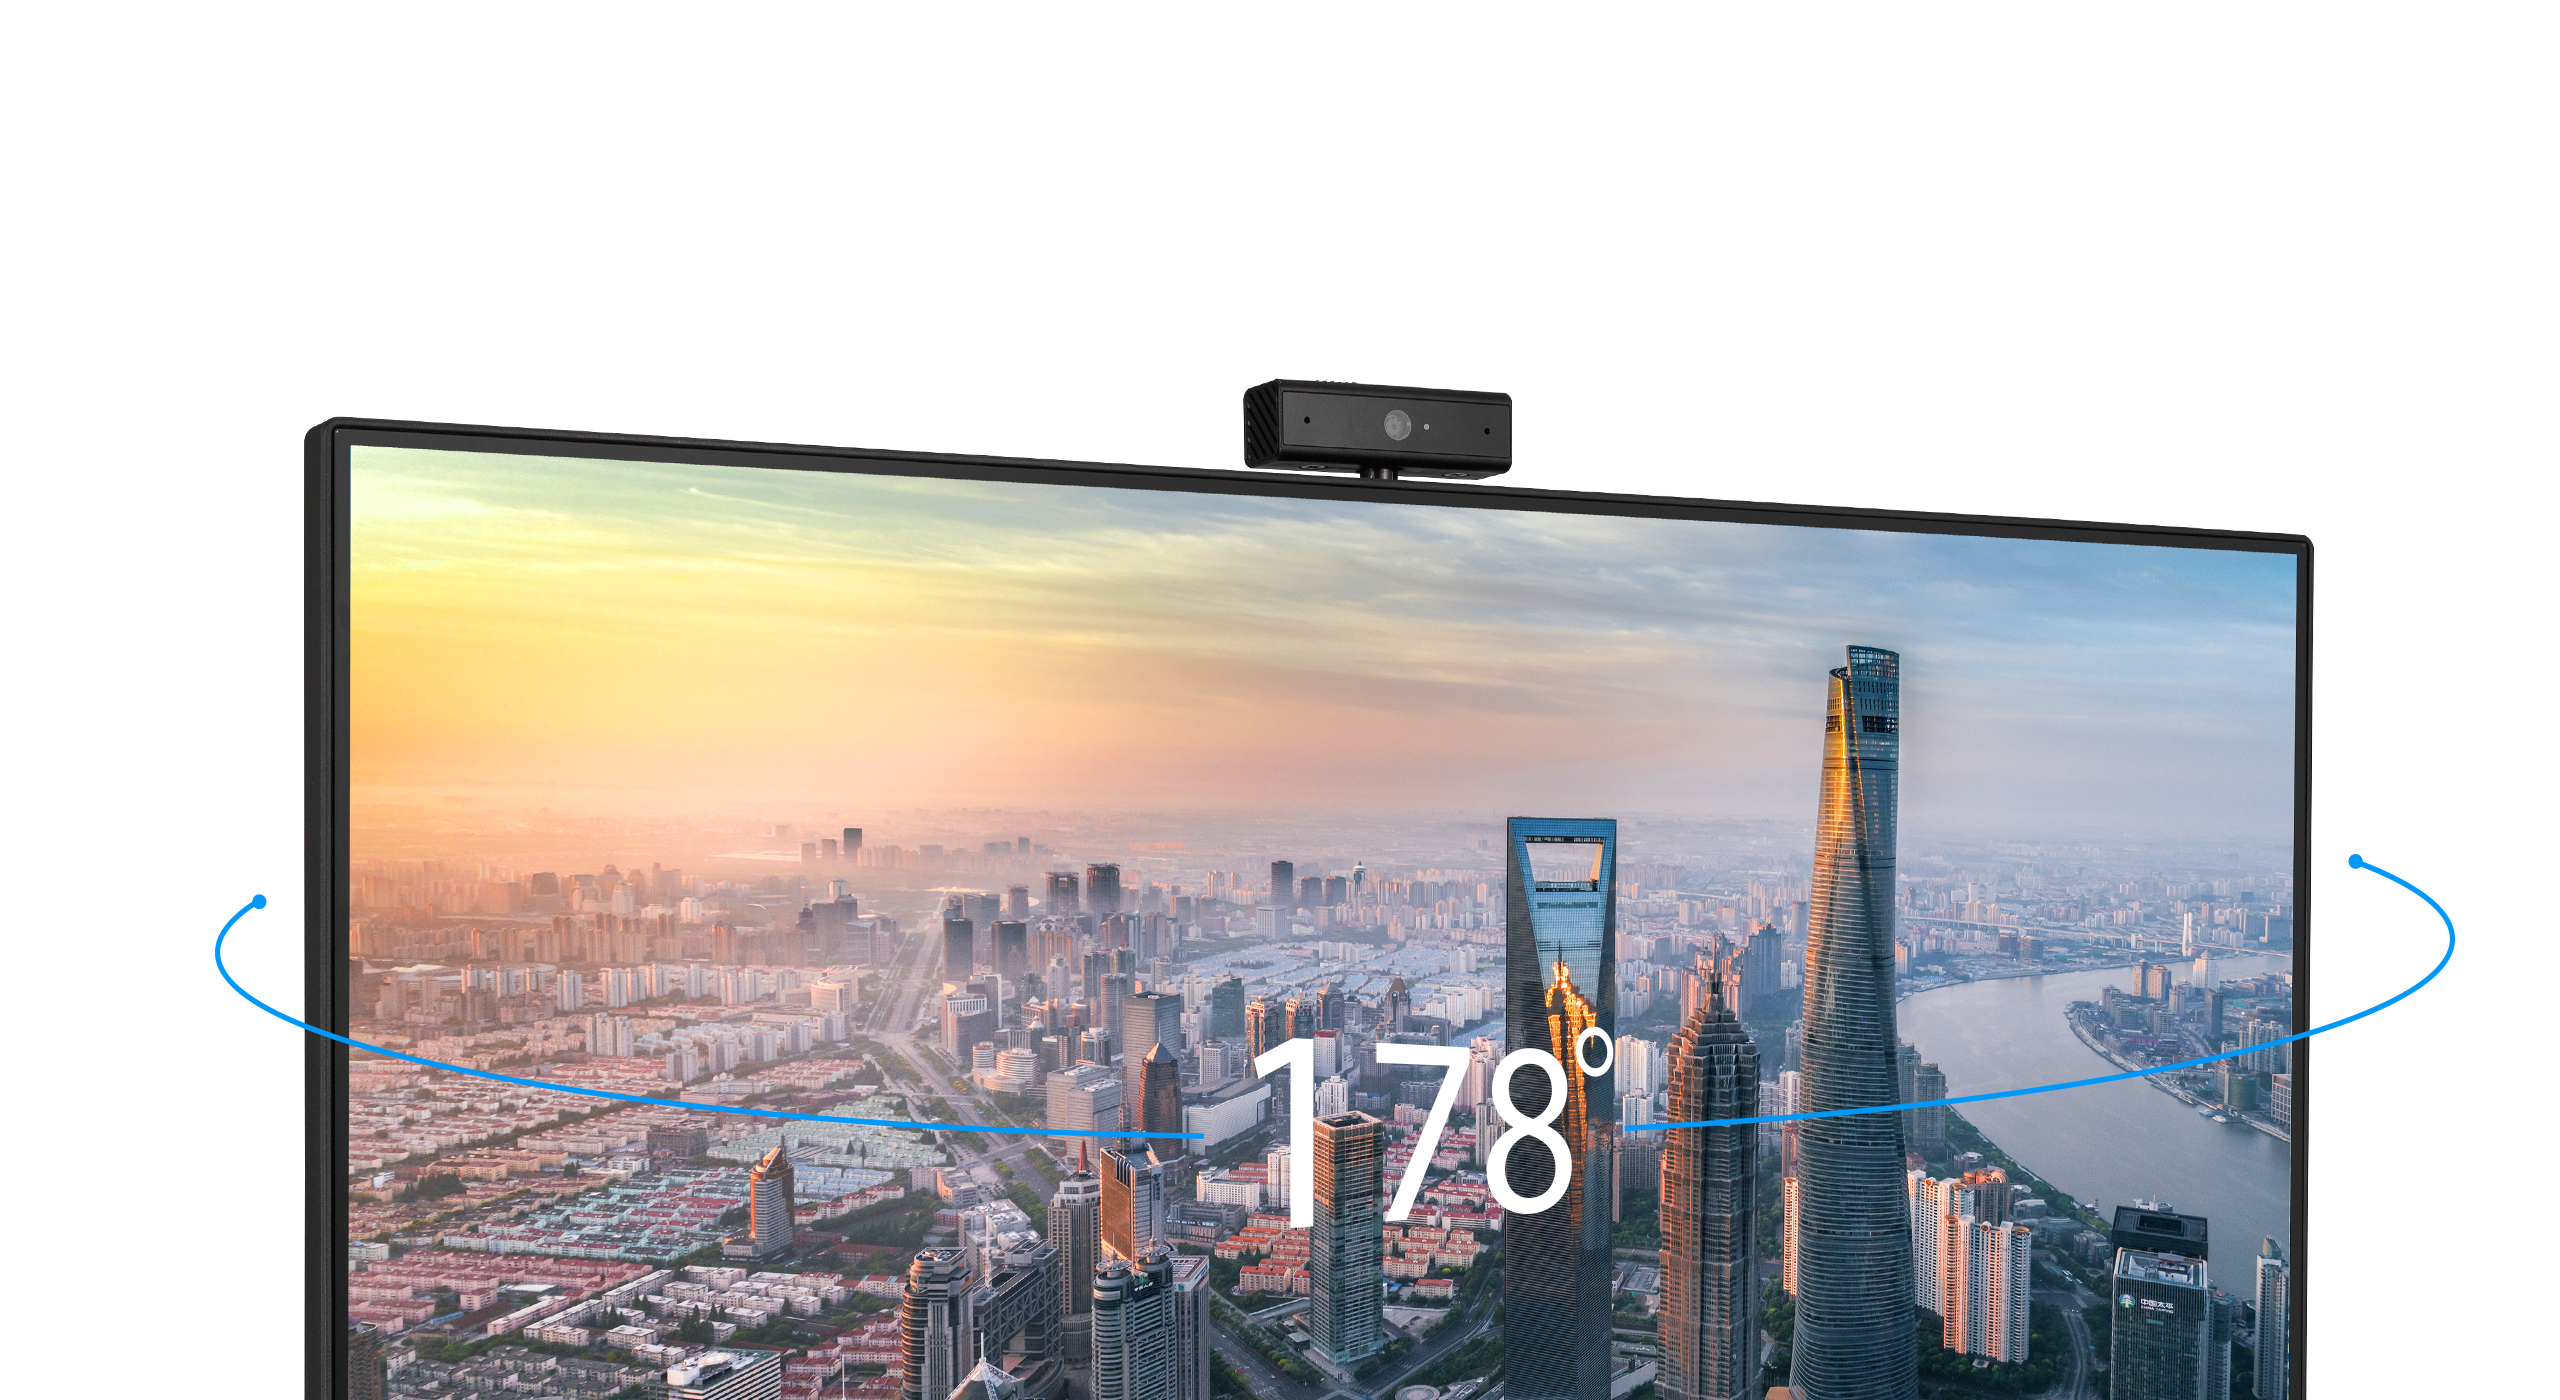 BE279QSK offers Full HD resolution to deliver stunning clarity.